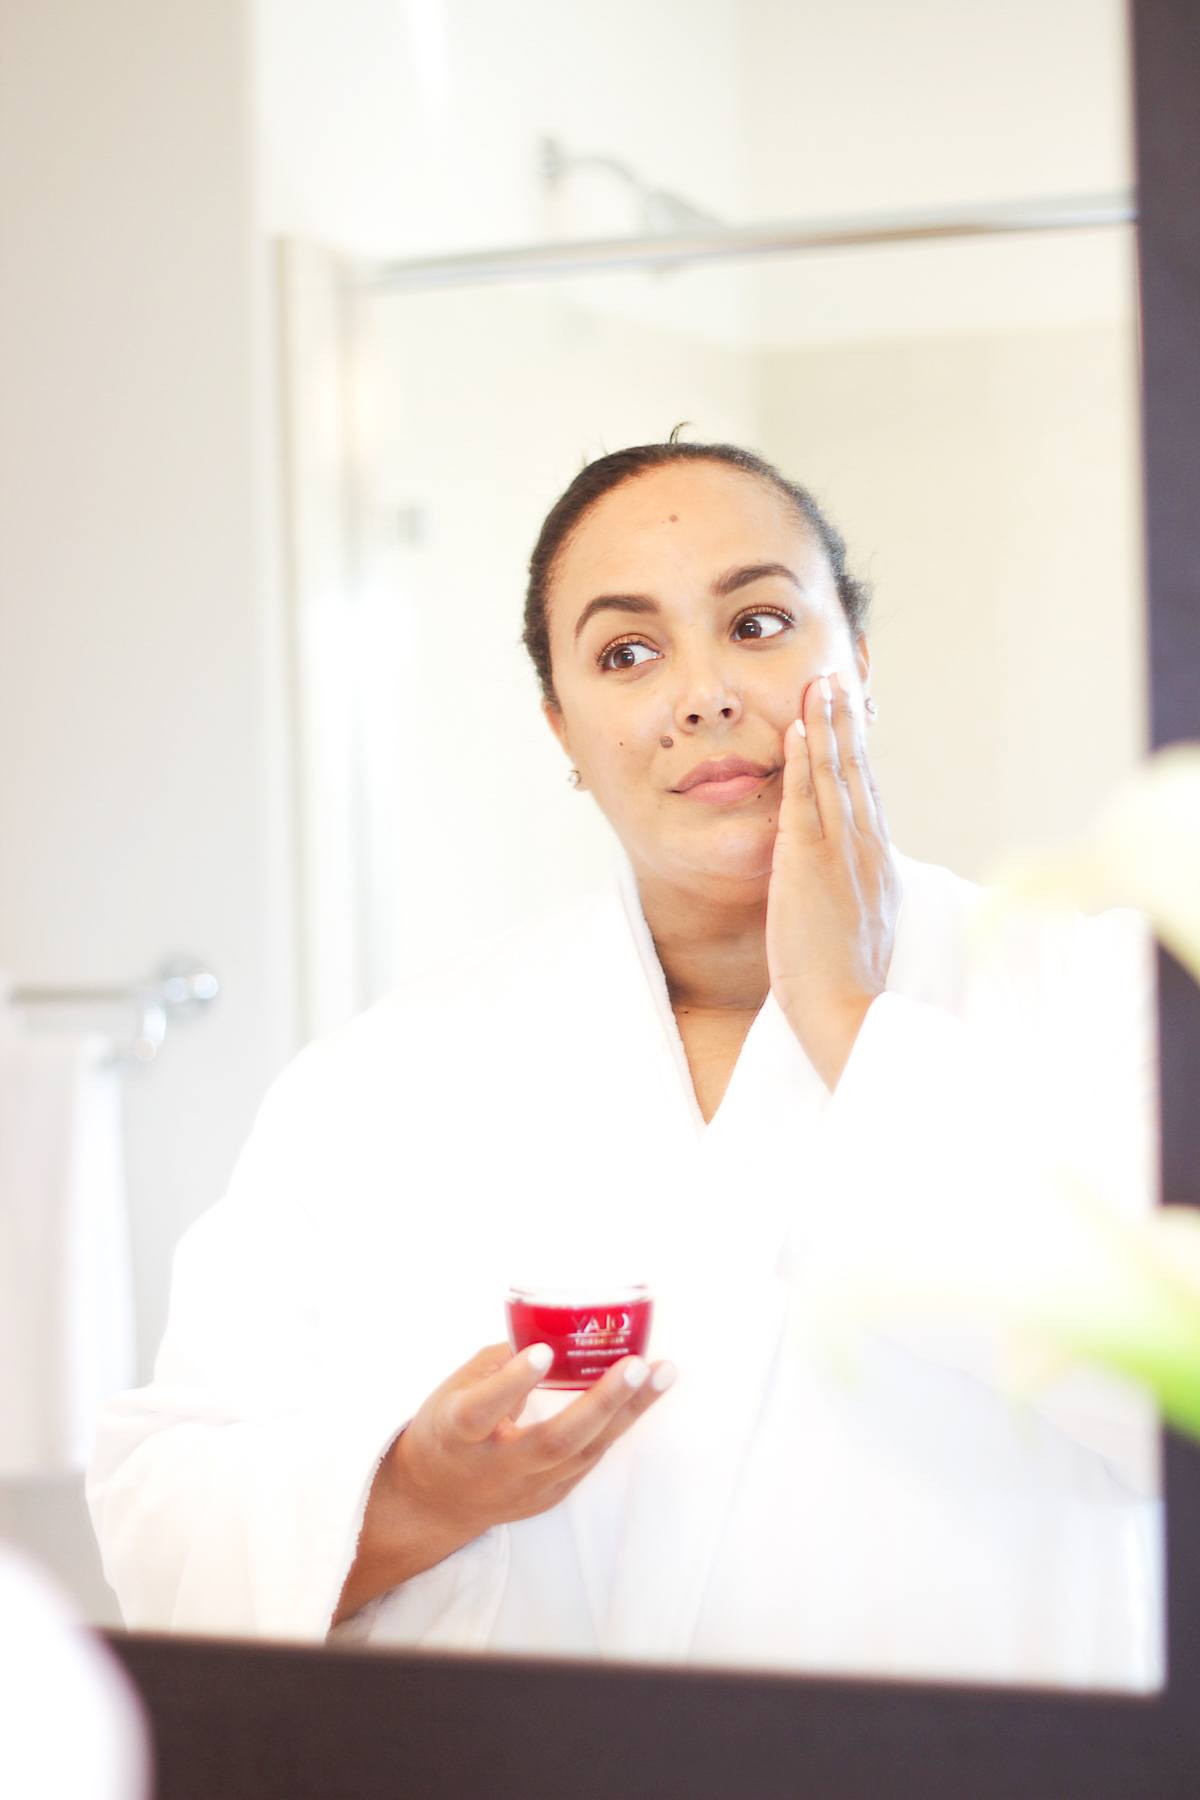 On the quest for younger looking skin? No worries, check out my top seven tips of anti-aging secrets + the best anti-aging cream EVER under $26!